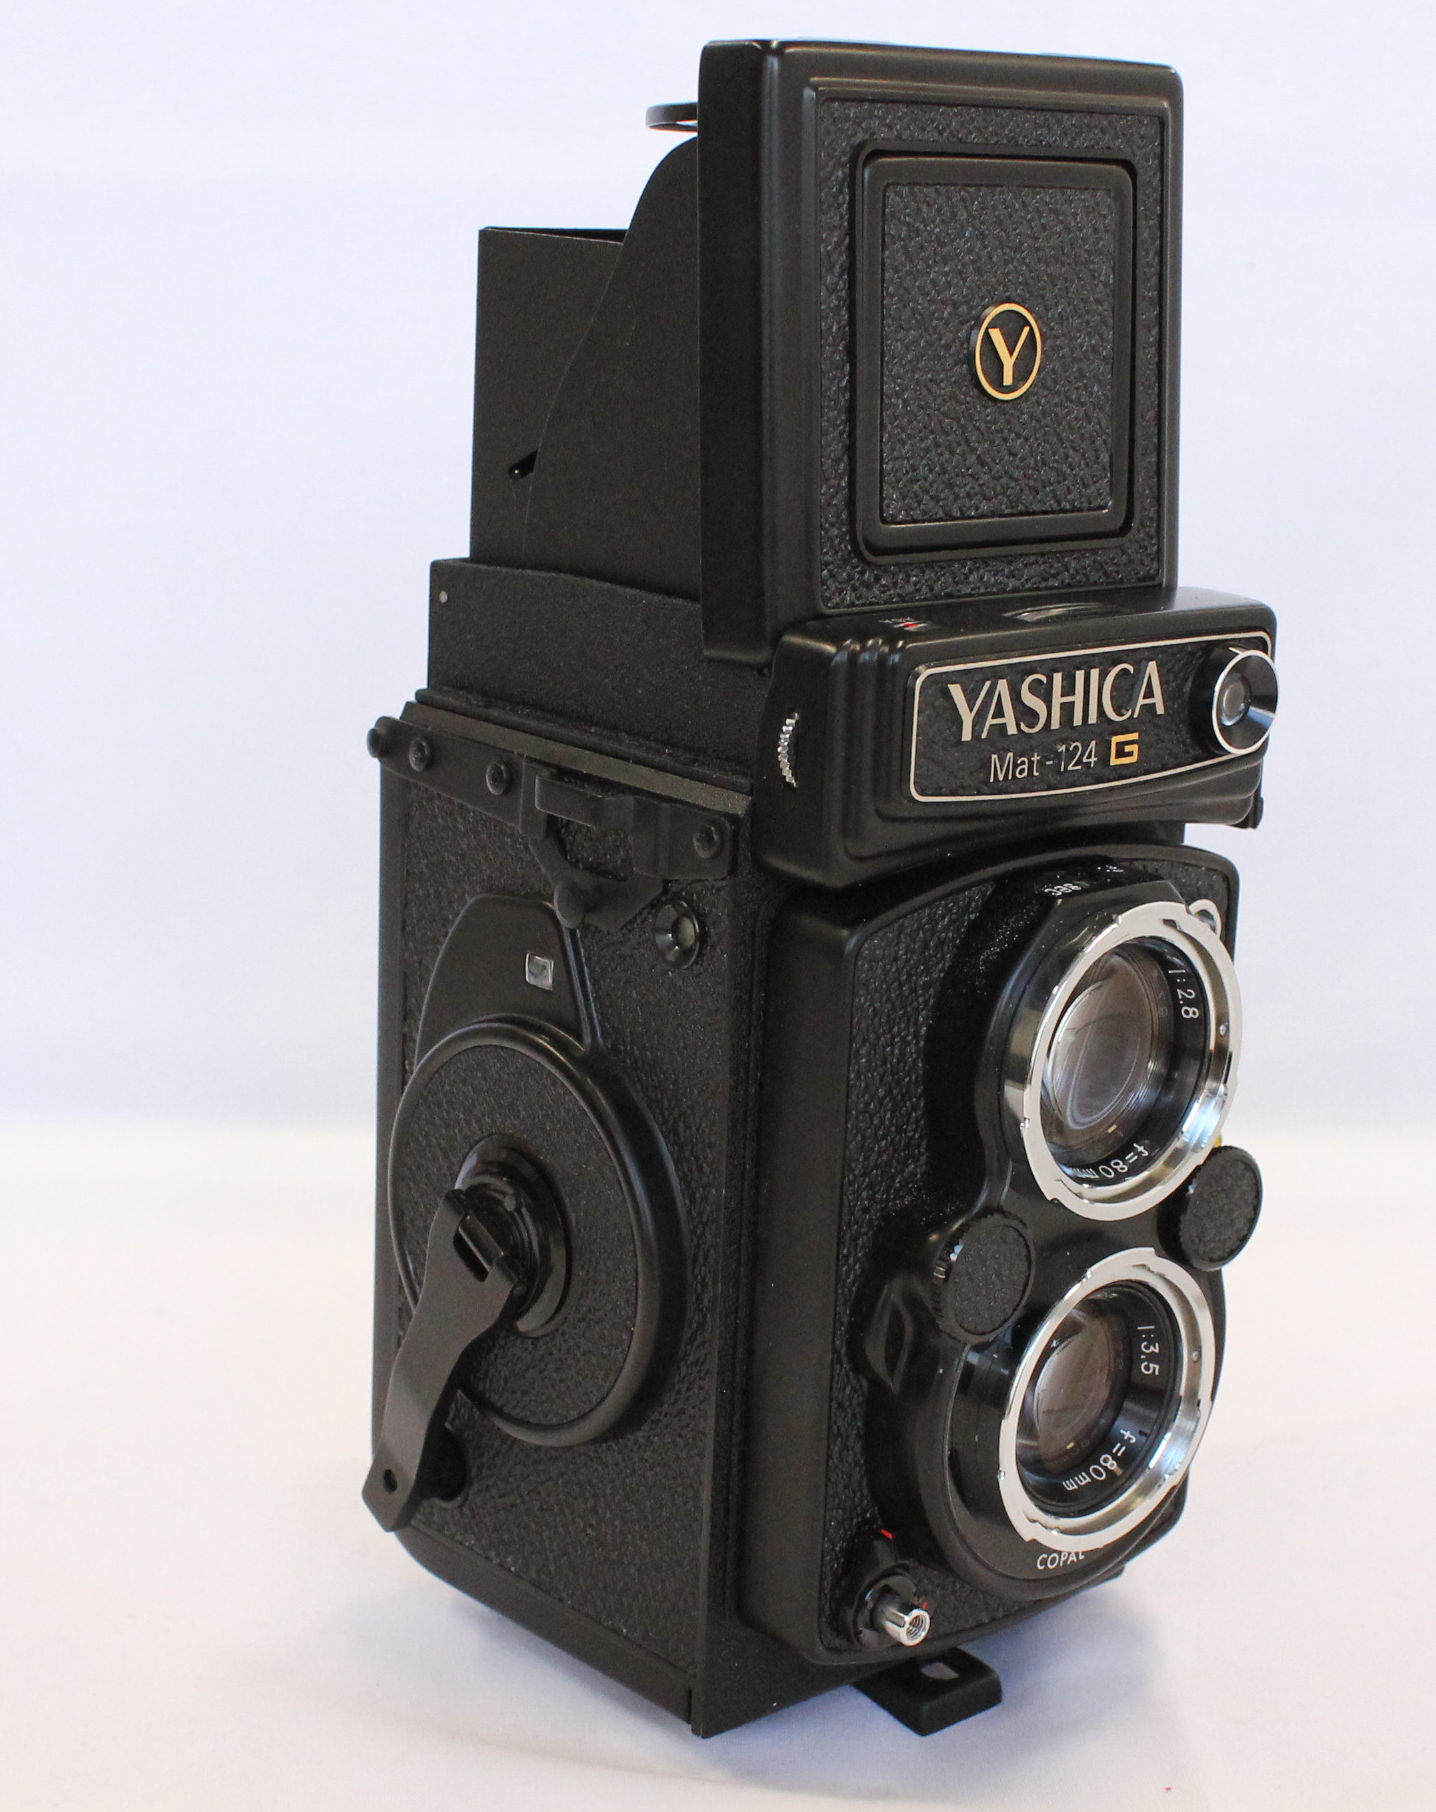  YASHICA MAT 124 G 6x6 TLR Medium Format Camera with 80mm F/3.5 Lens from Japan Photo 4